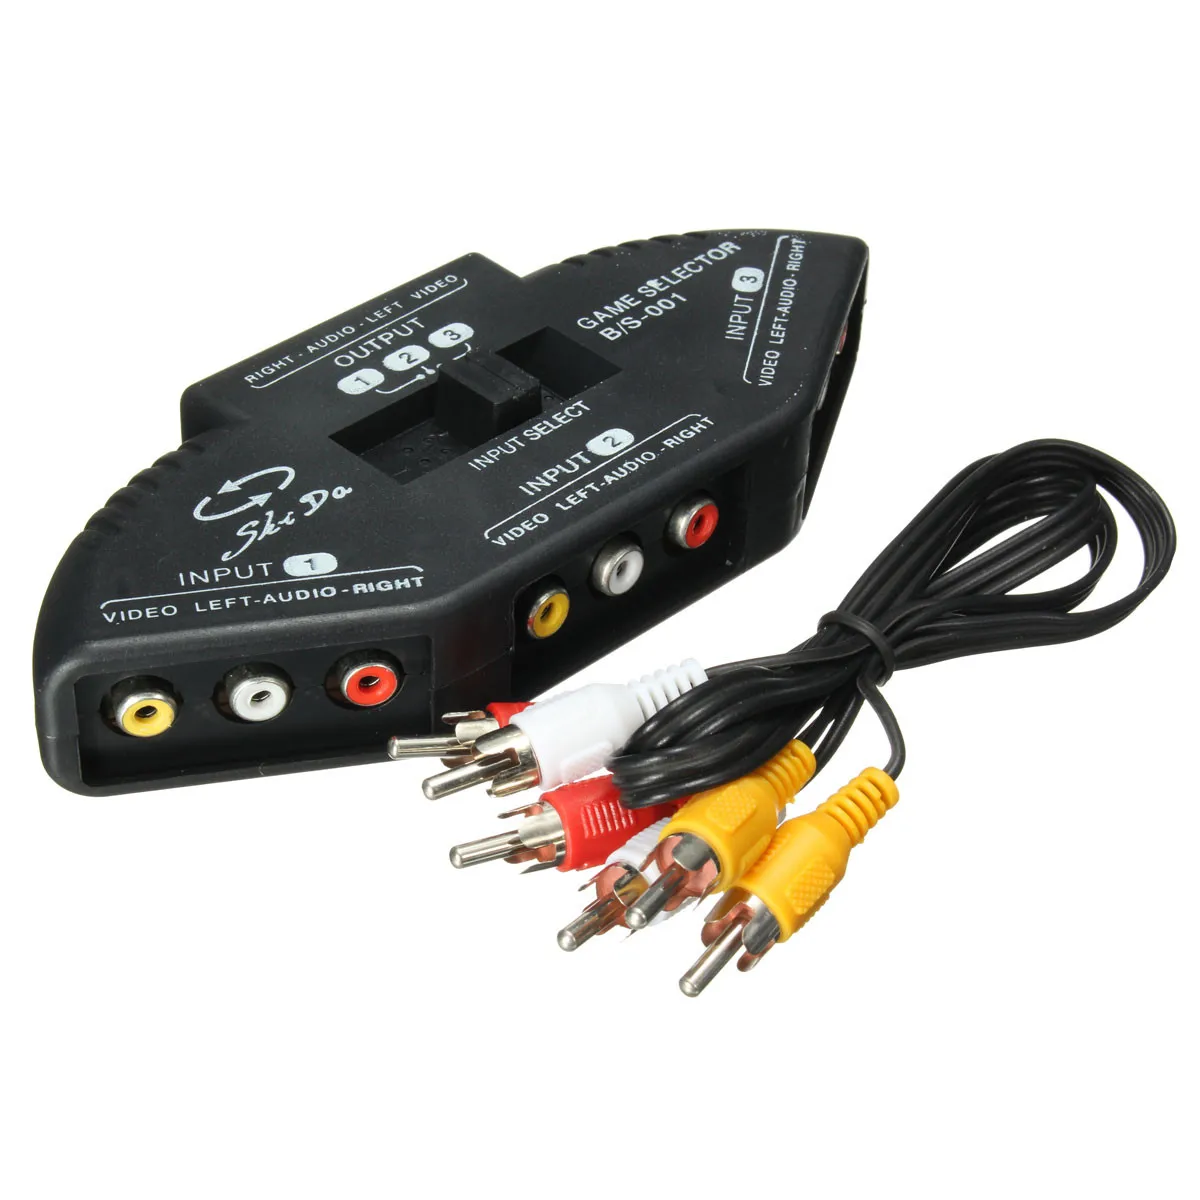 

3 Way Audio Video AV RCA Switch Box Composite Selector Splitter With FT Cables for All Standard AV Devices